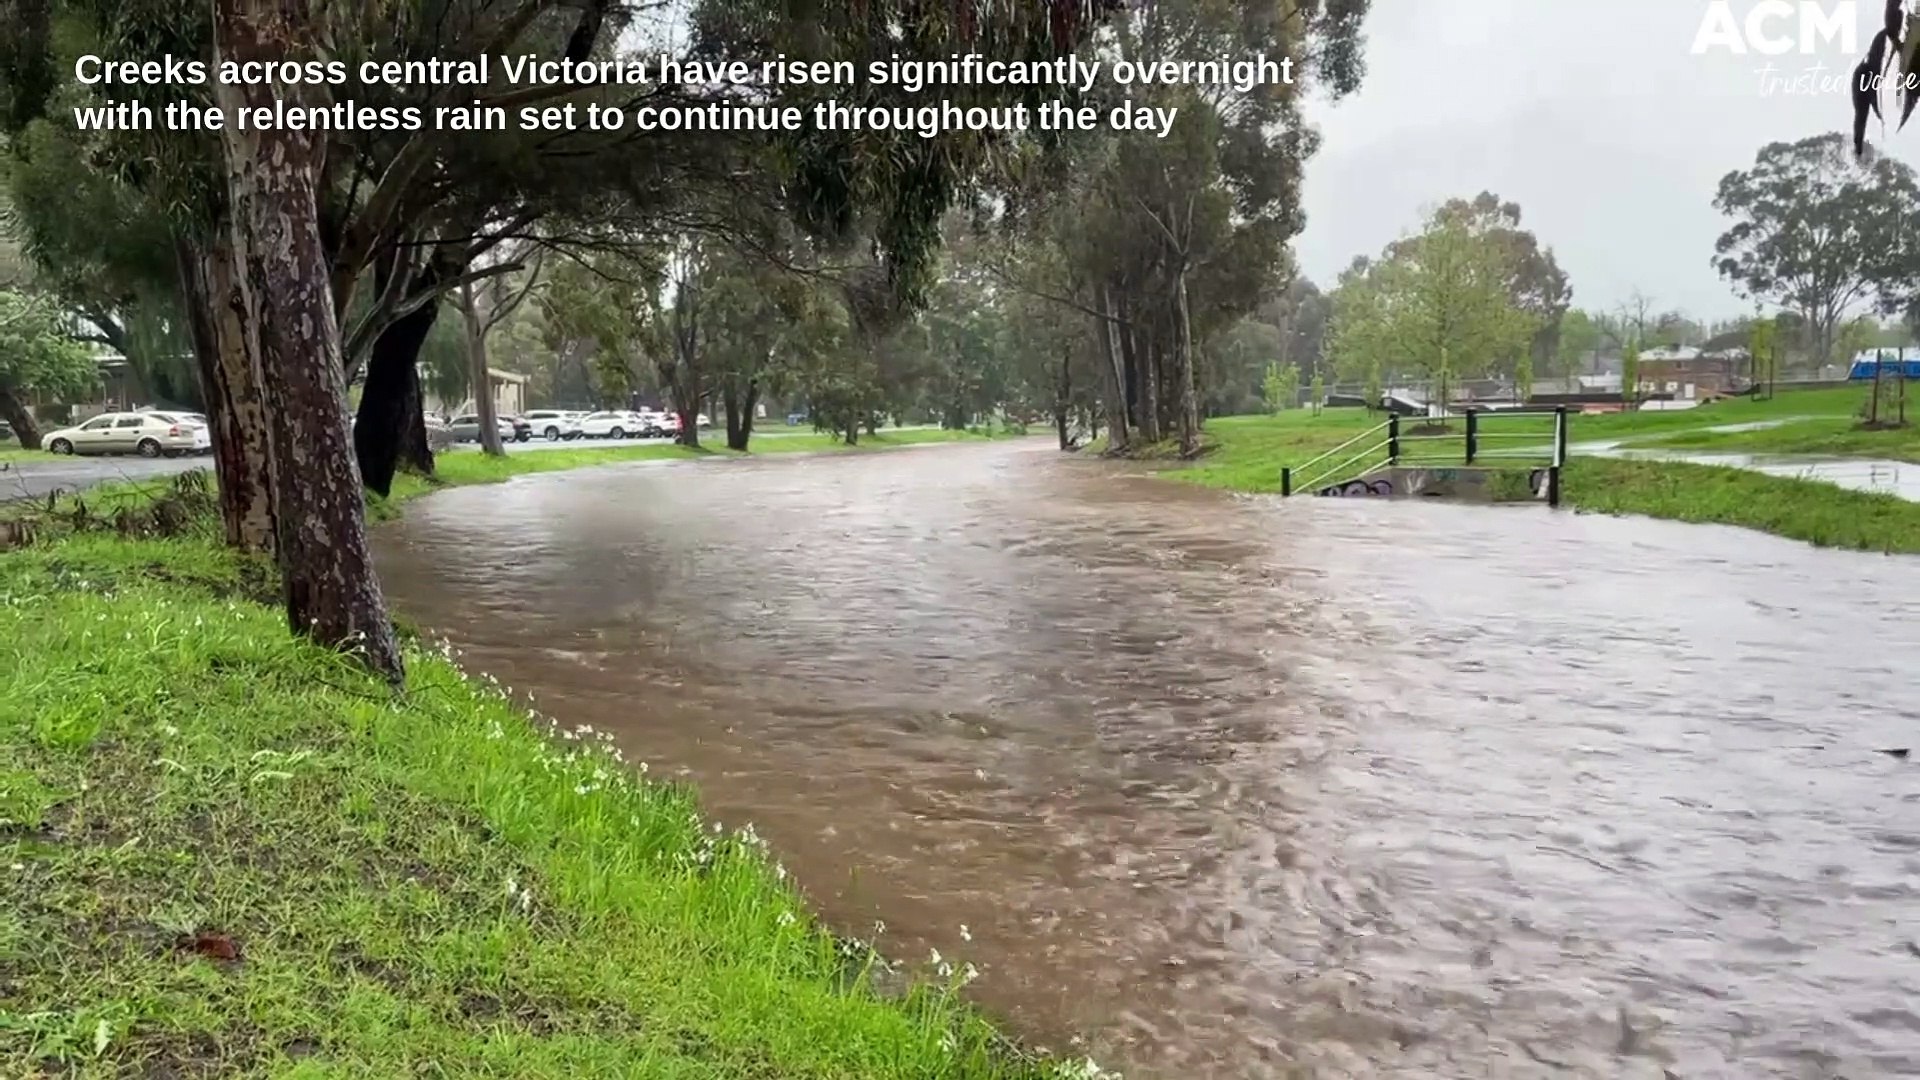 Self-guided walking tour – Stormwater Harvesting at Queen Victoria